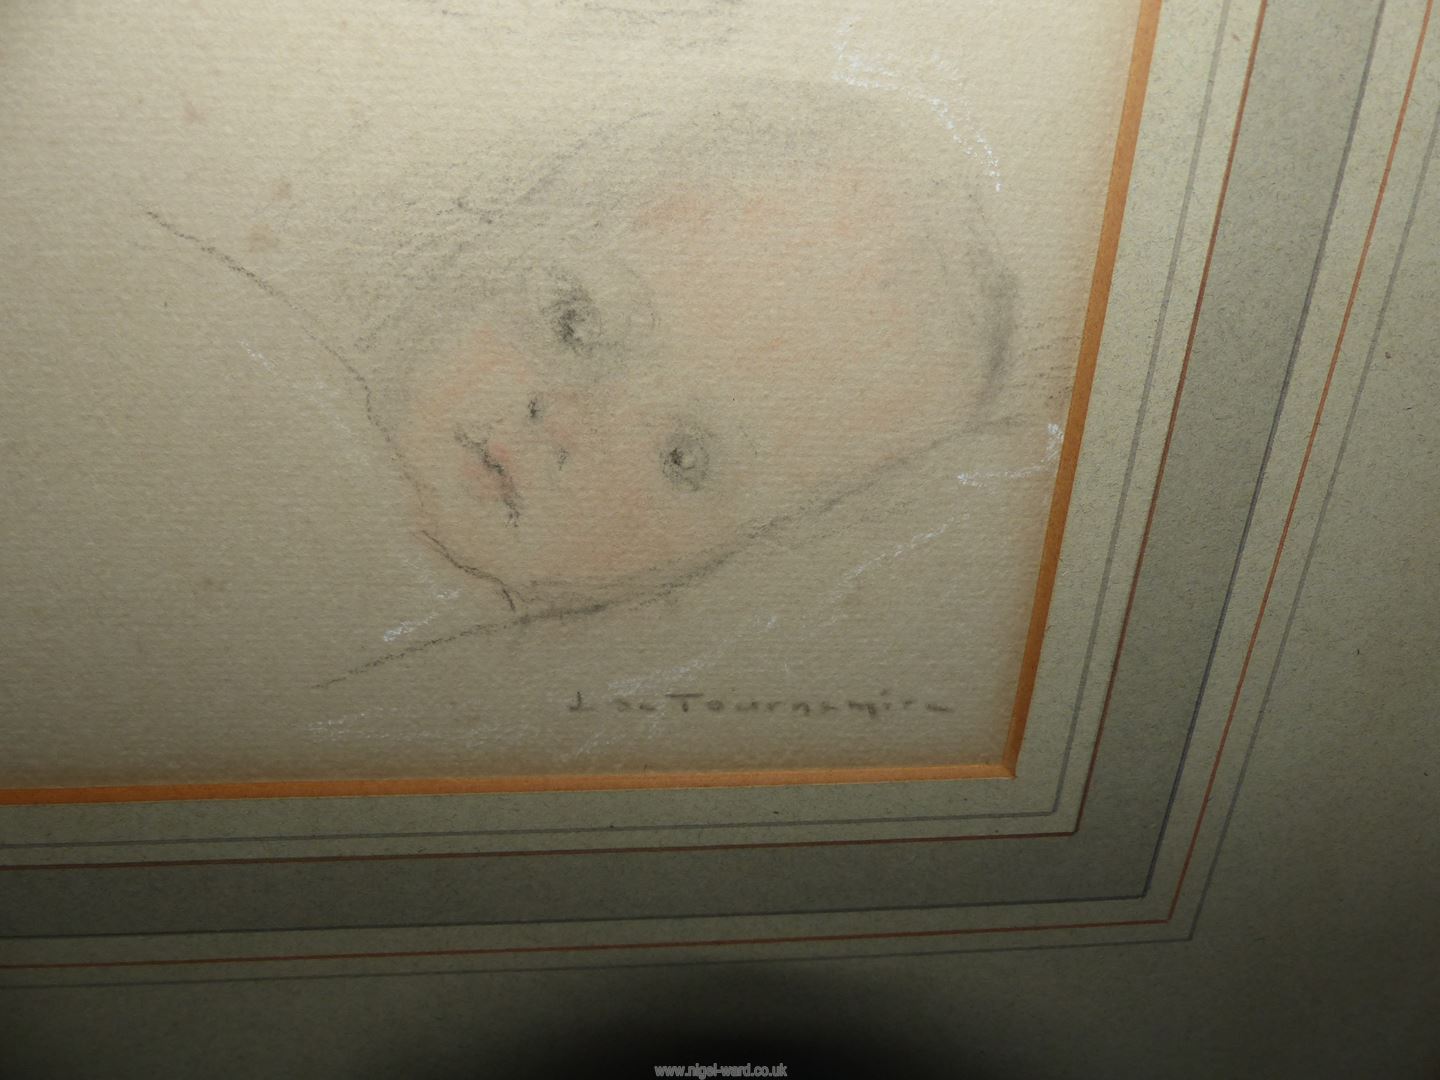 A page of Watercolour studies of an infant, signed De Tournemine, circa 1900. - Image 2 of 2